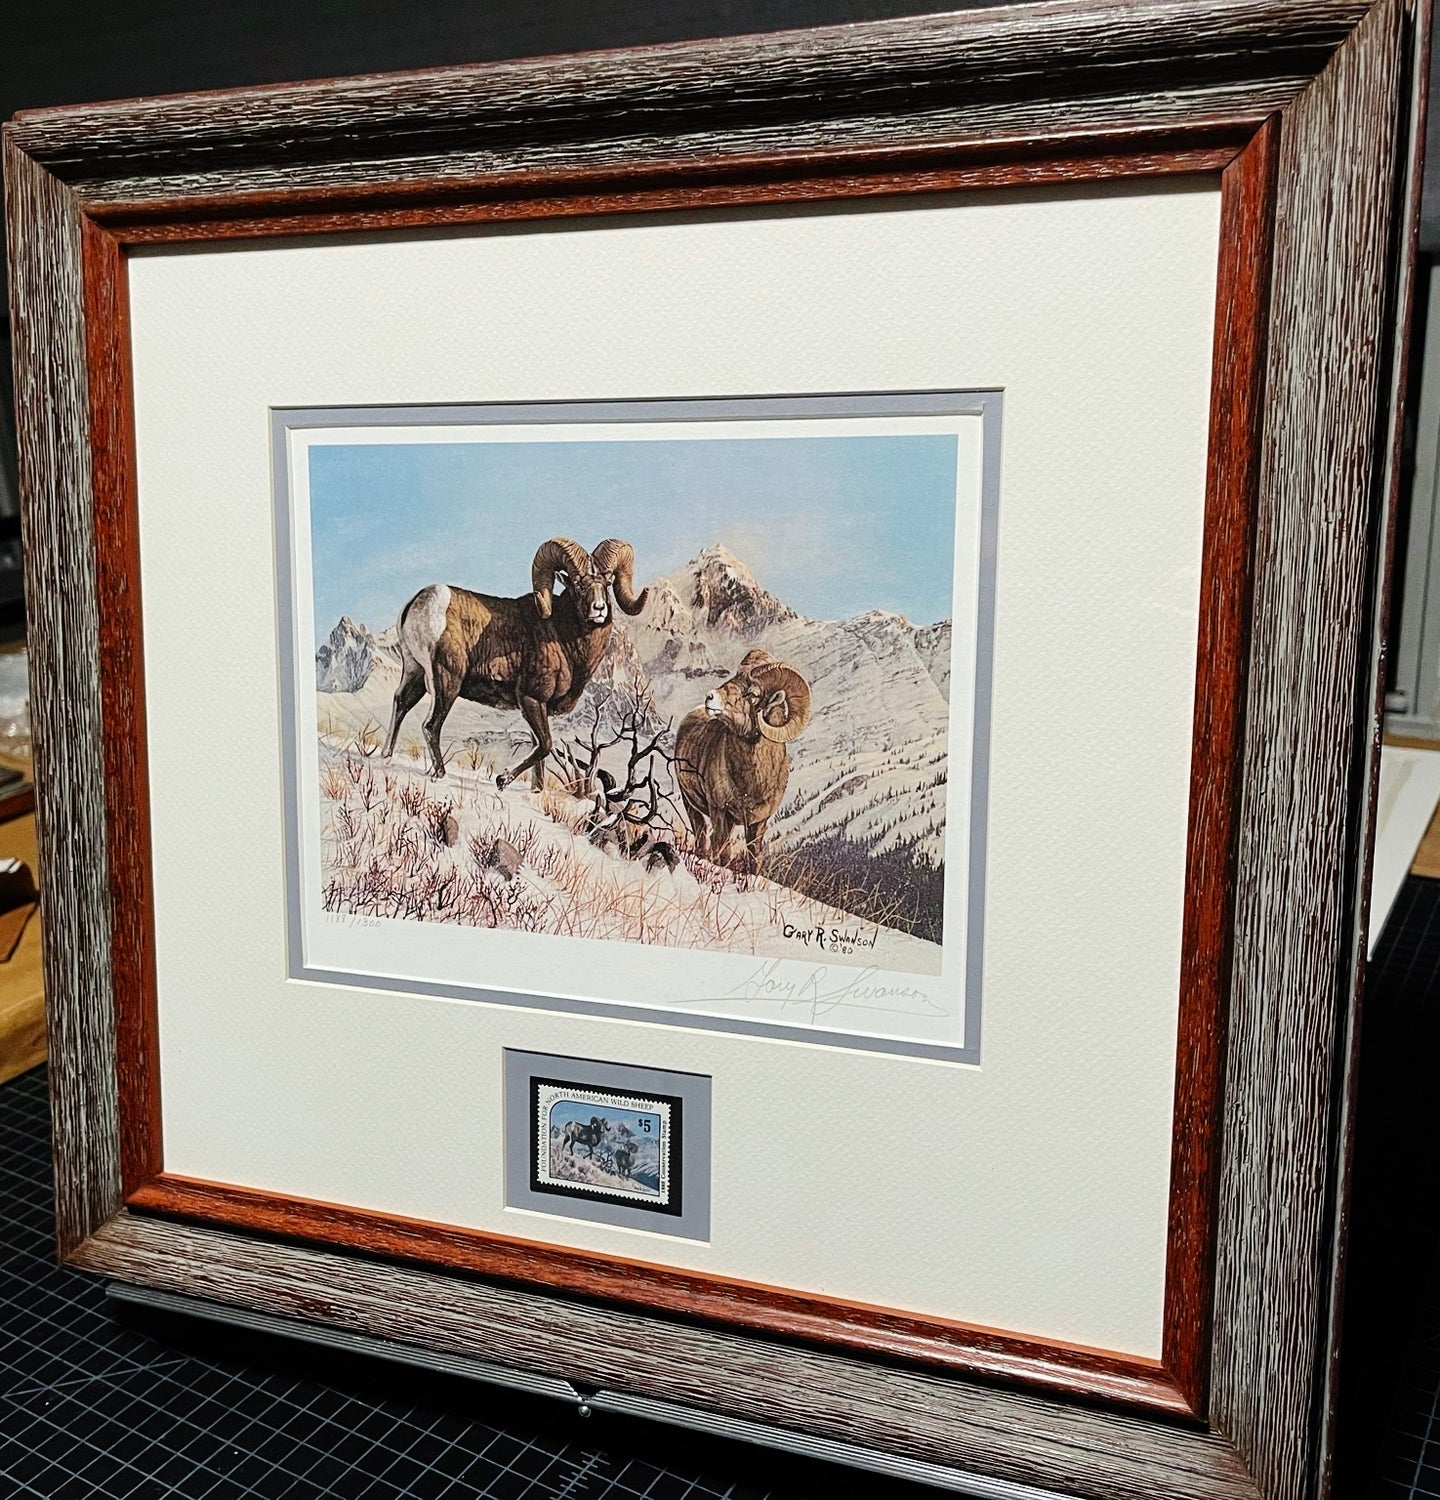 Gary Swanson - 1980 Foundation For North American Wild Sheep Conservation Stamp Print With Stamp - Brand New Custom Sporting Frame